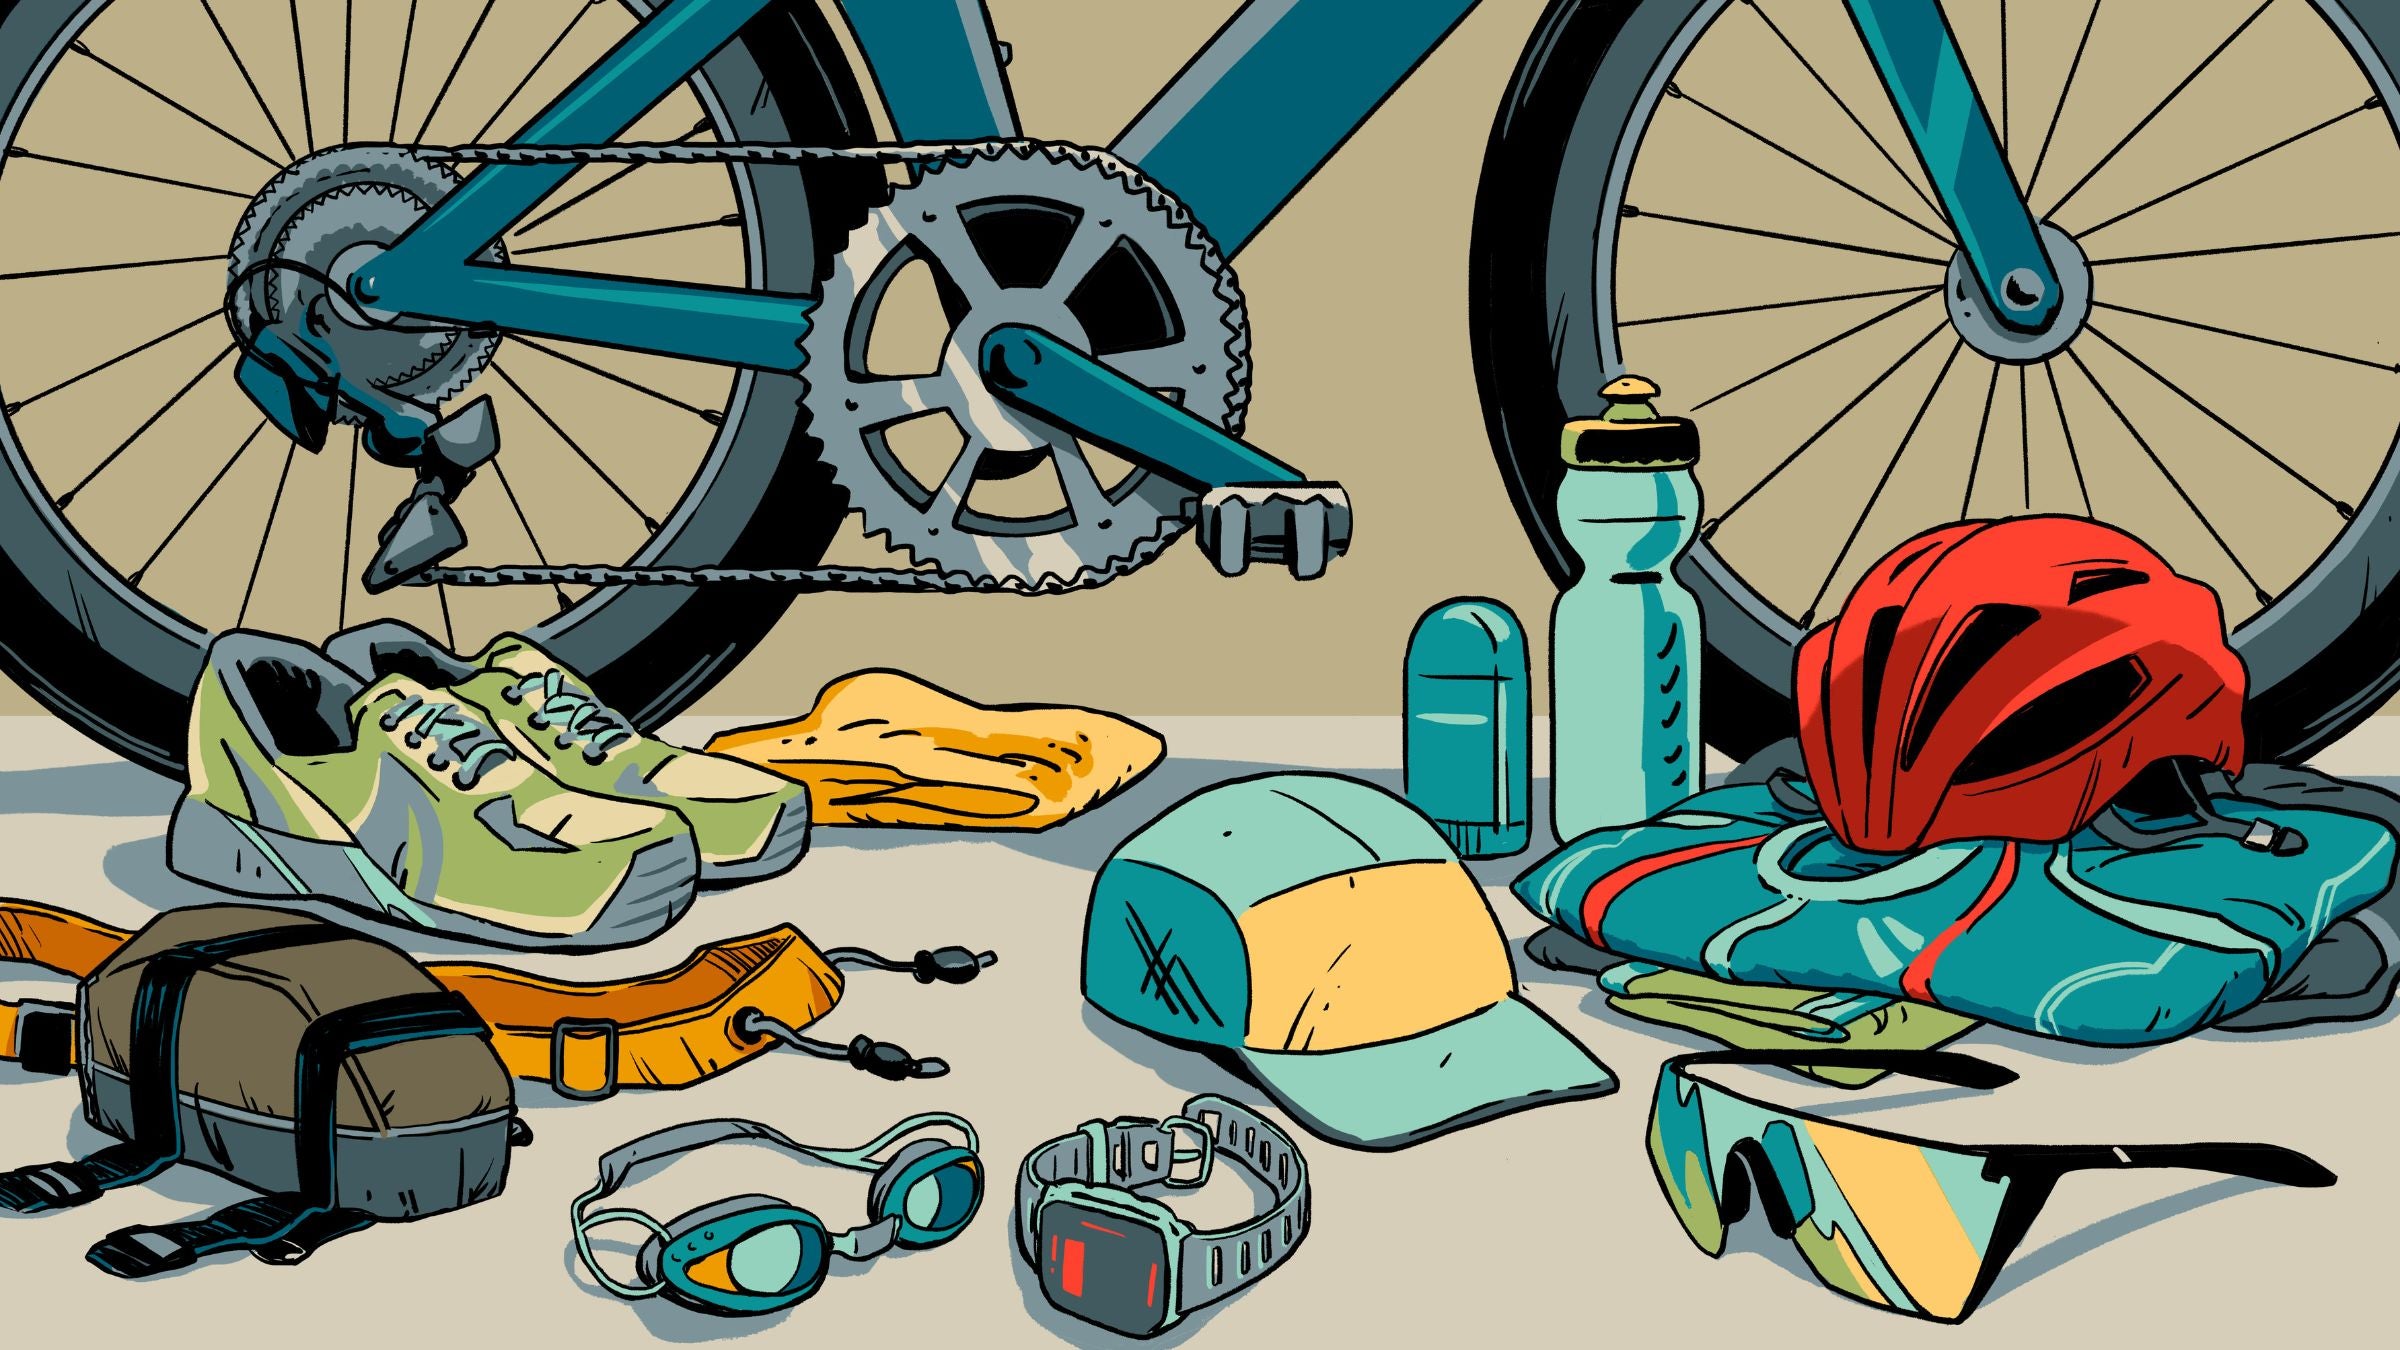 Triathlon Checklist: The Top 10 Pieces of Gear to Crush Your Next Race.